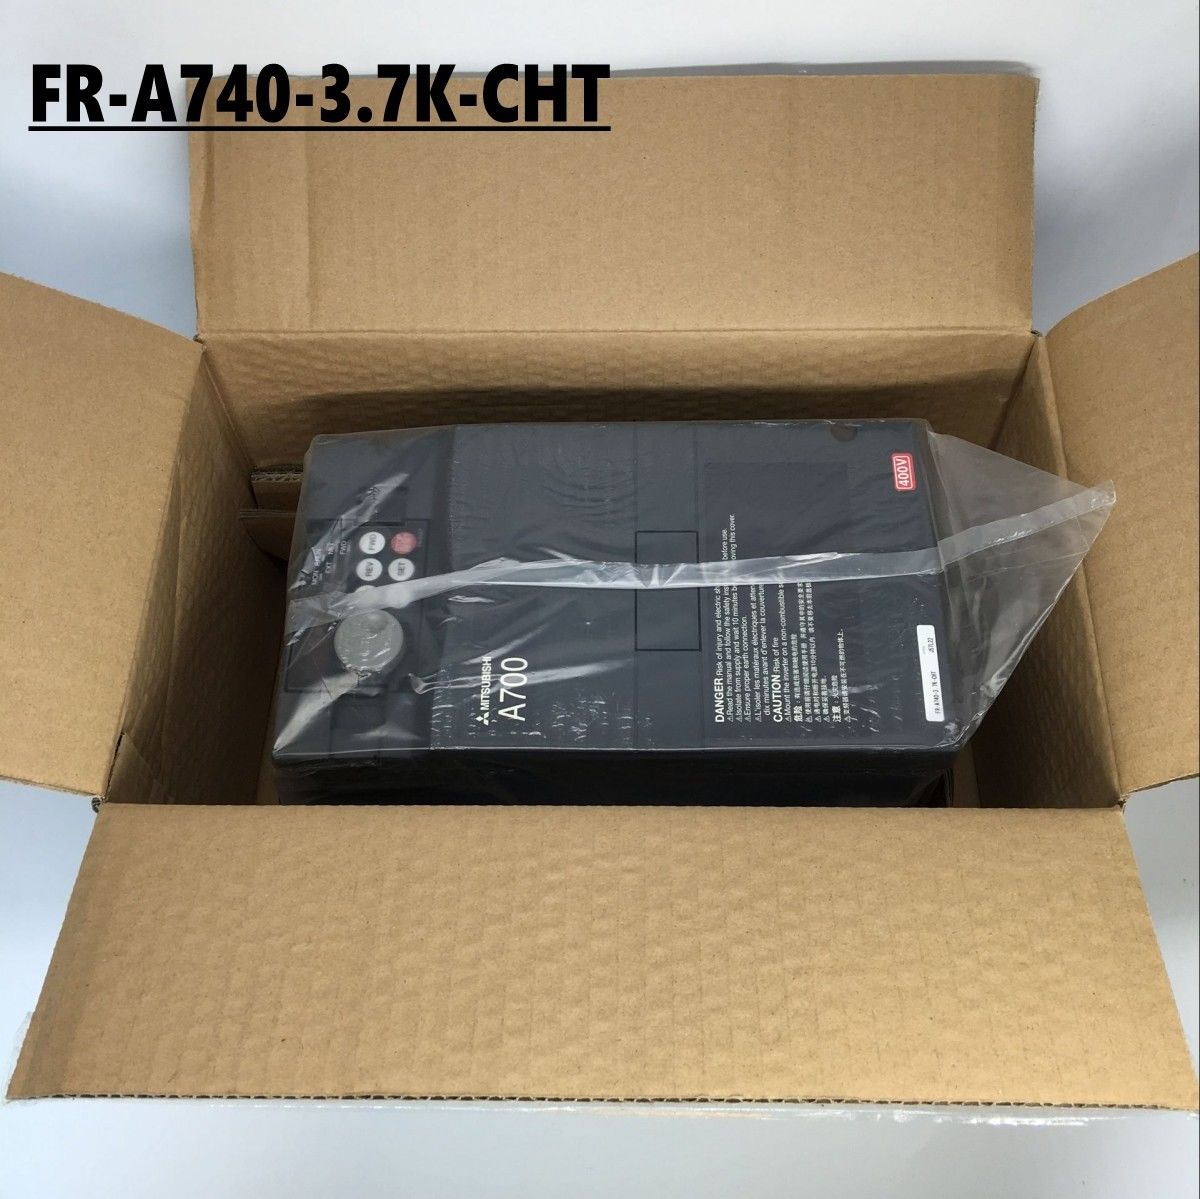 New MITSUBISHI Transducers FR-A740-3.7K-CHT 380V 3.7KW IN BOX FRA7403.7KCHT - Click Image to Close